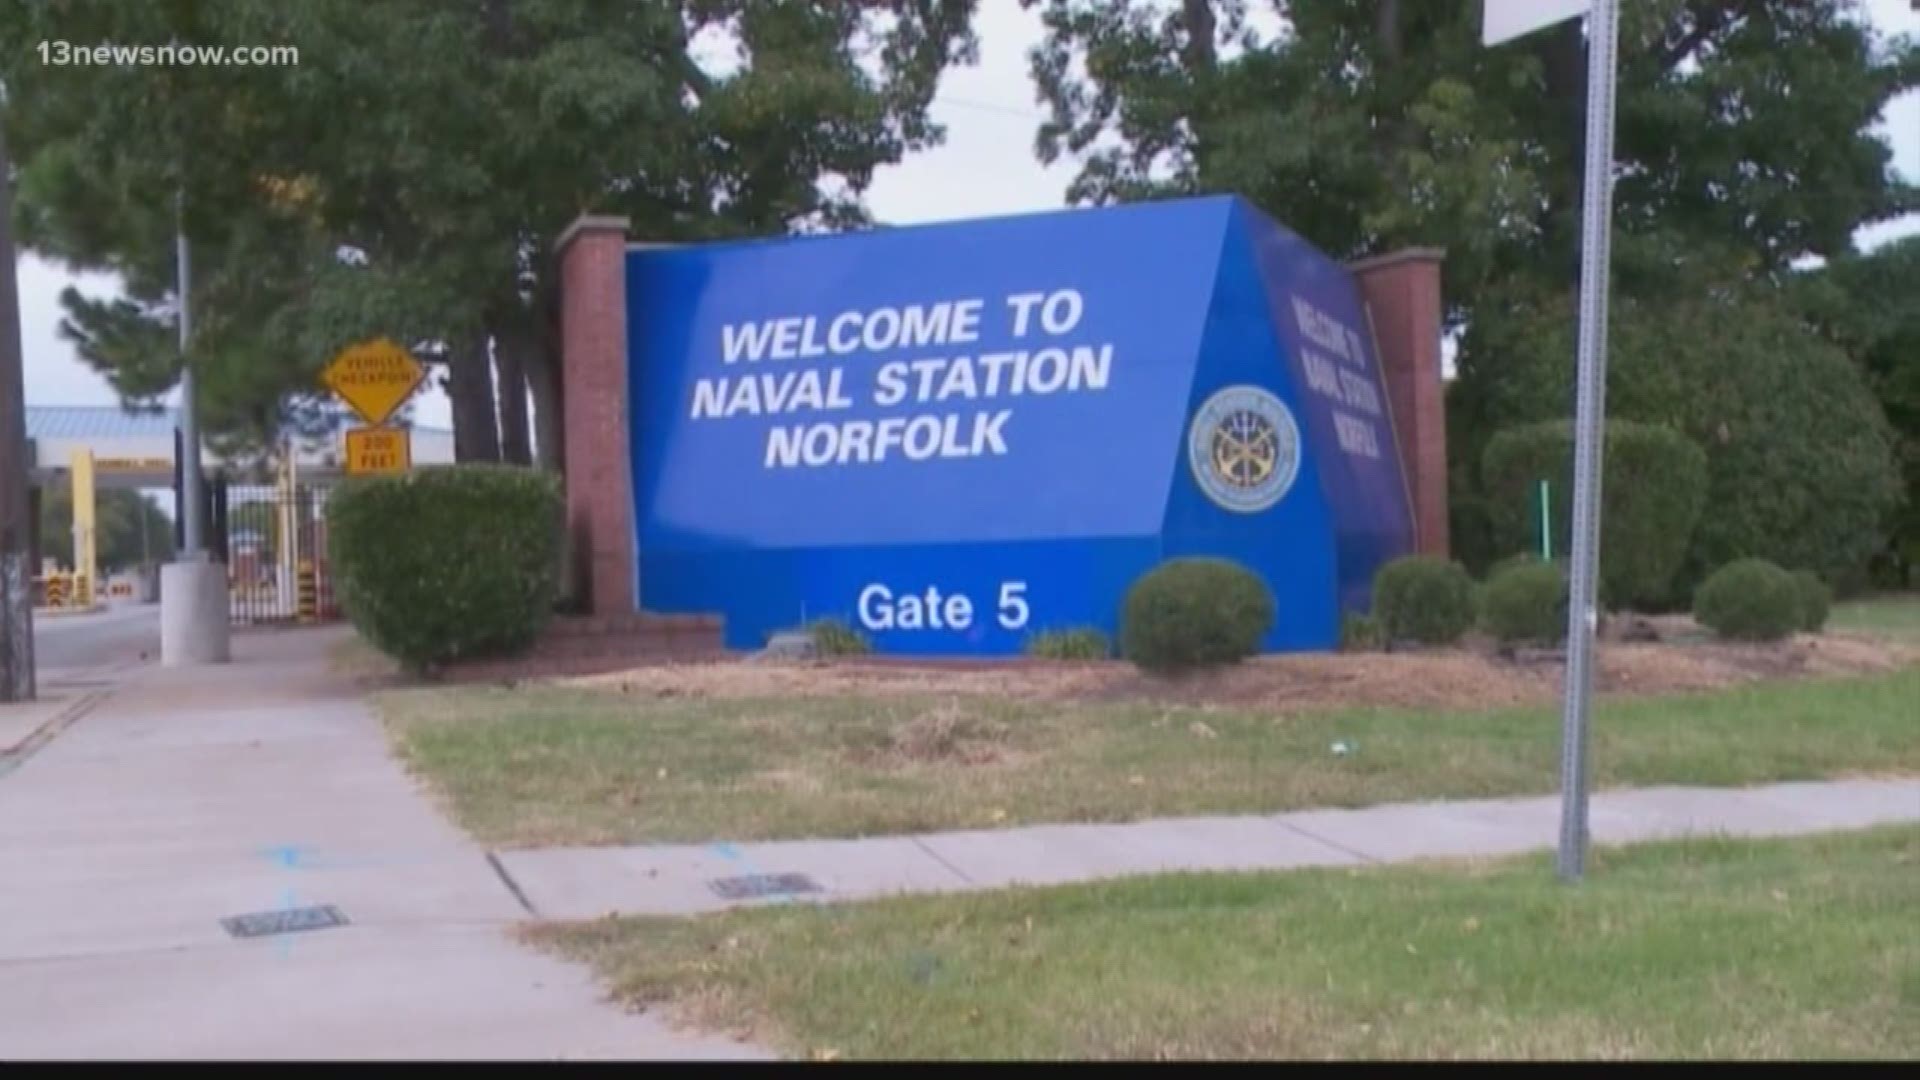 A sailor accidentally shot himself in the leg at Naval Station Norfolk. He was taken to a medical facility and is expected to be okay.